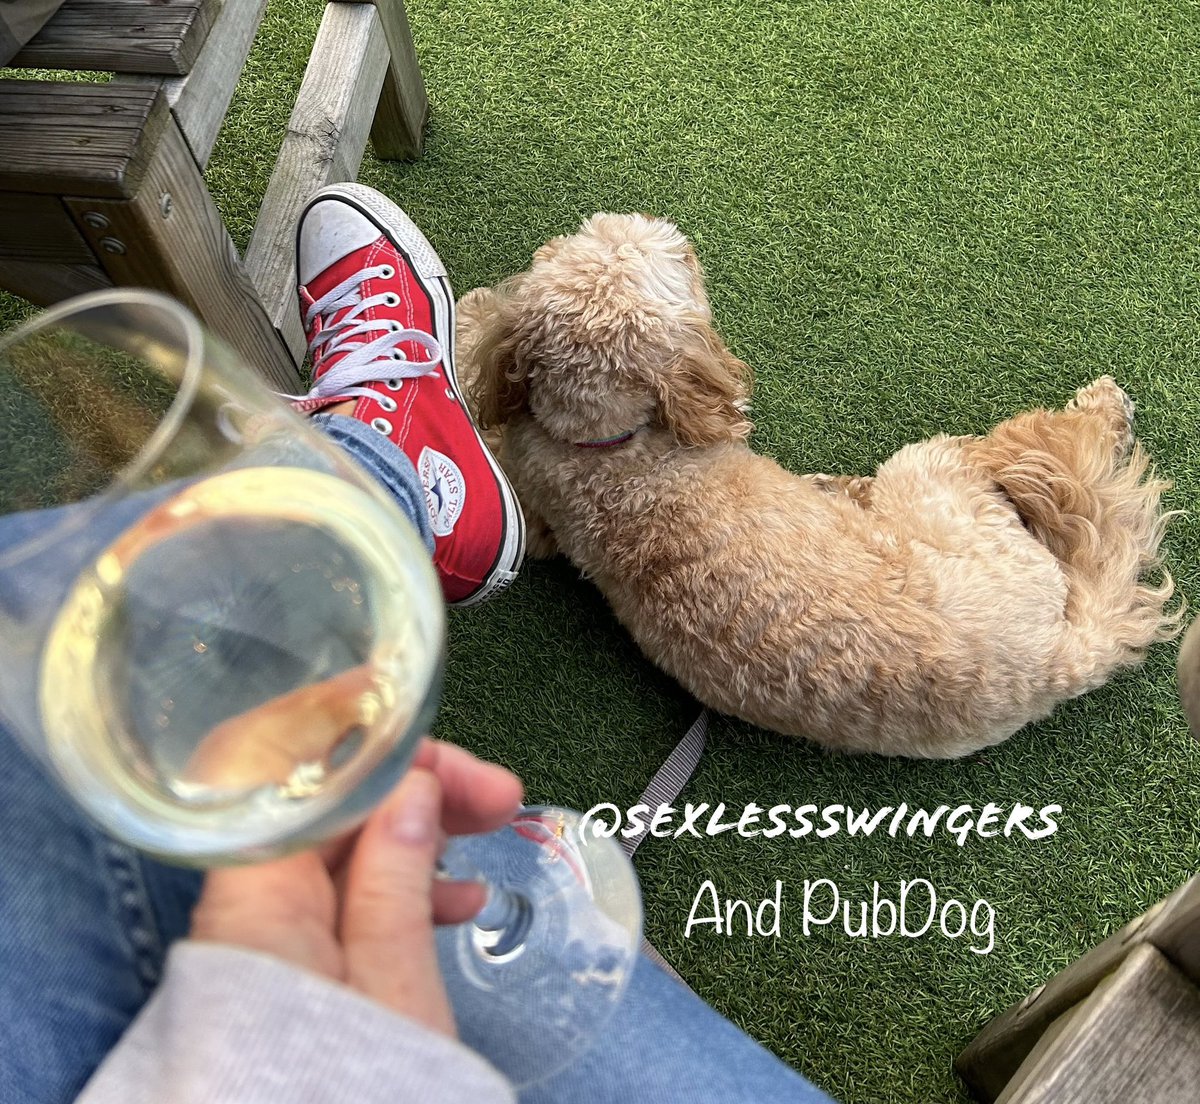 Happy #BankHolidayWeekend to everyone in the U.K. ! 

Sunday night, relaxing in the pub garden with #PubDog & a large glass of pinot. 

Reminiscing about last weekend! Join us on episode 42 and listen in to the fun times we had 😁😈❤️

#SundayNight #NoWorkTomorrow #StartOfSummer